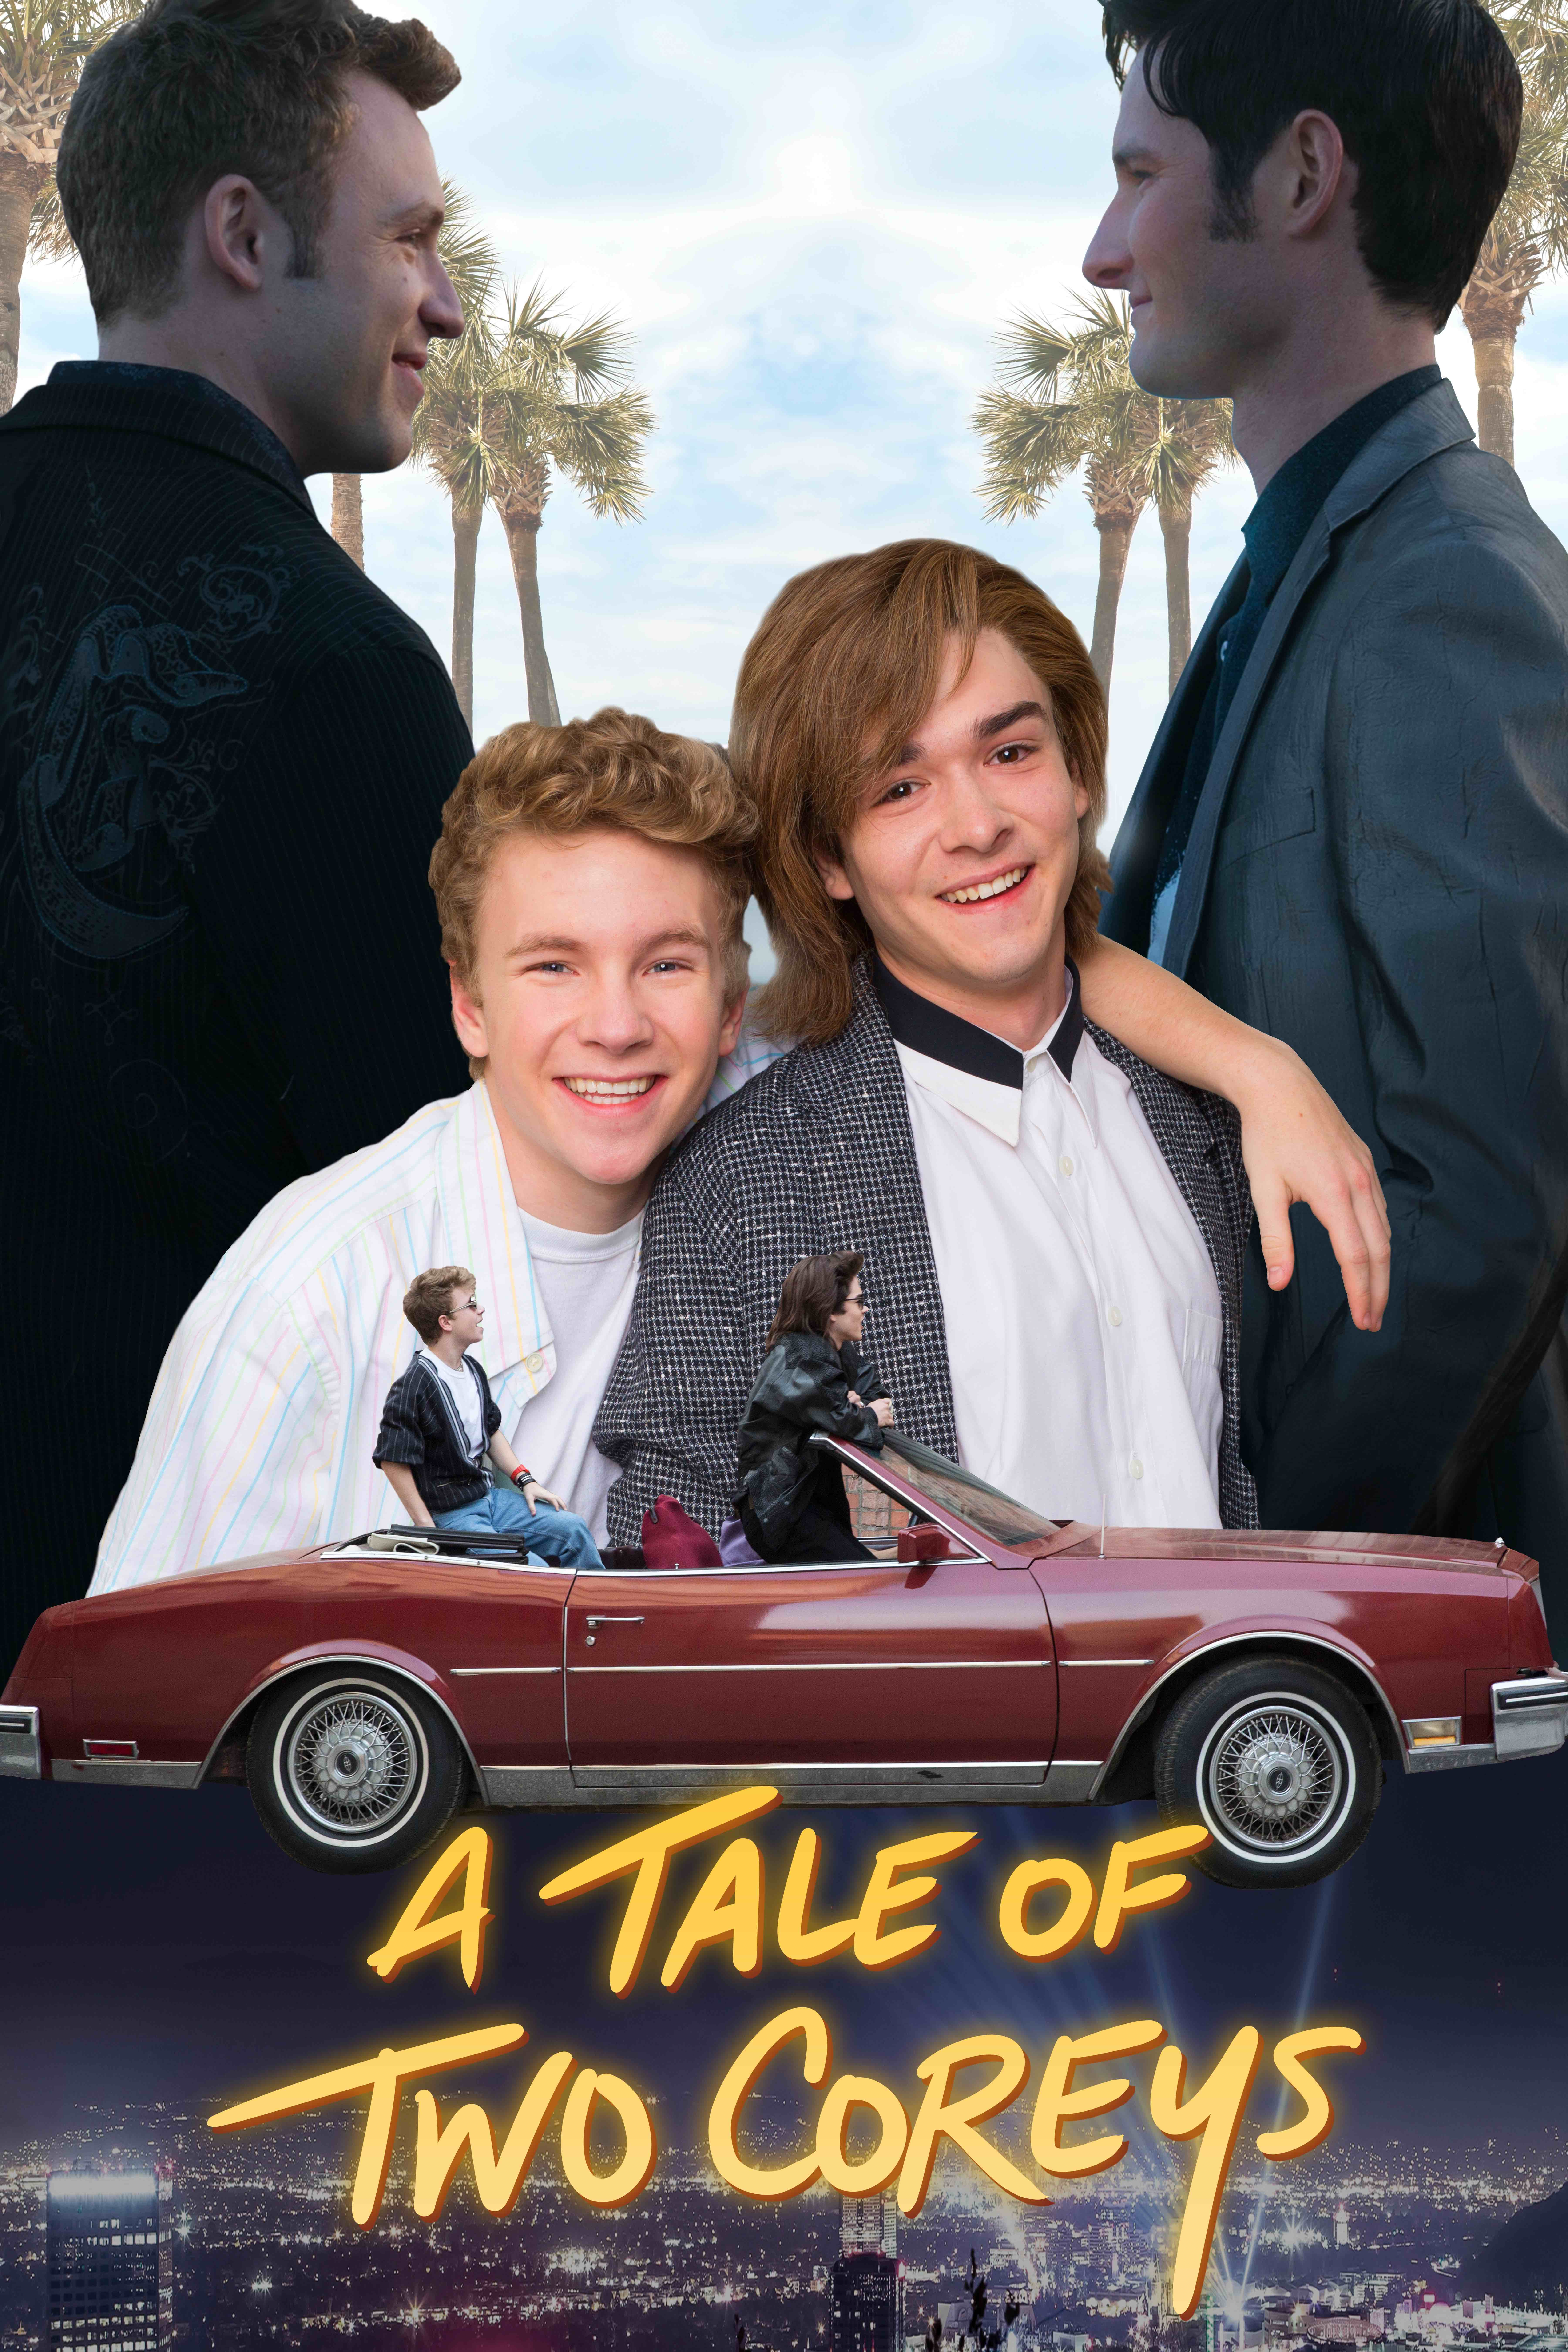 A Tale of Two Coreys (2018) starring Elijah Marcano on DVD on DVD